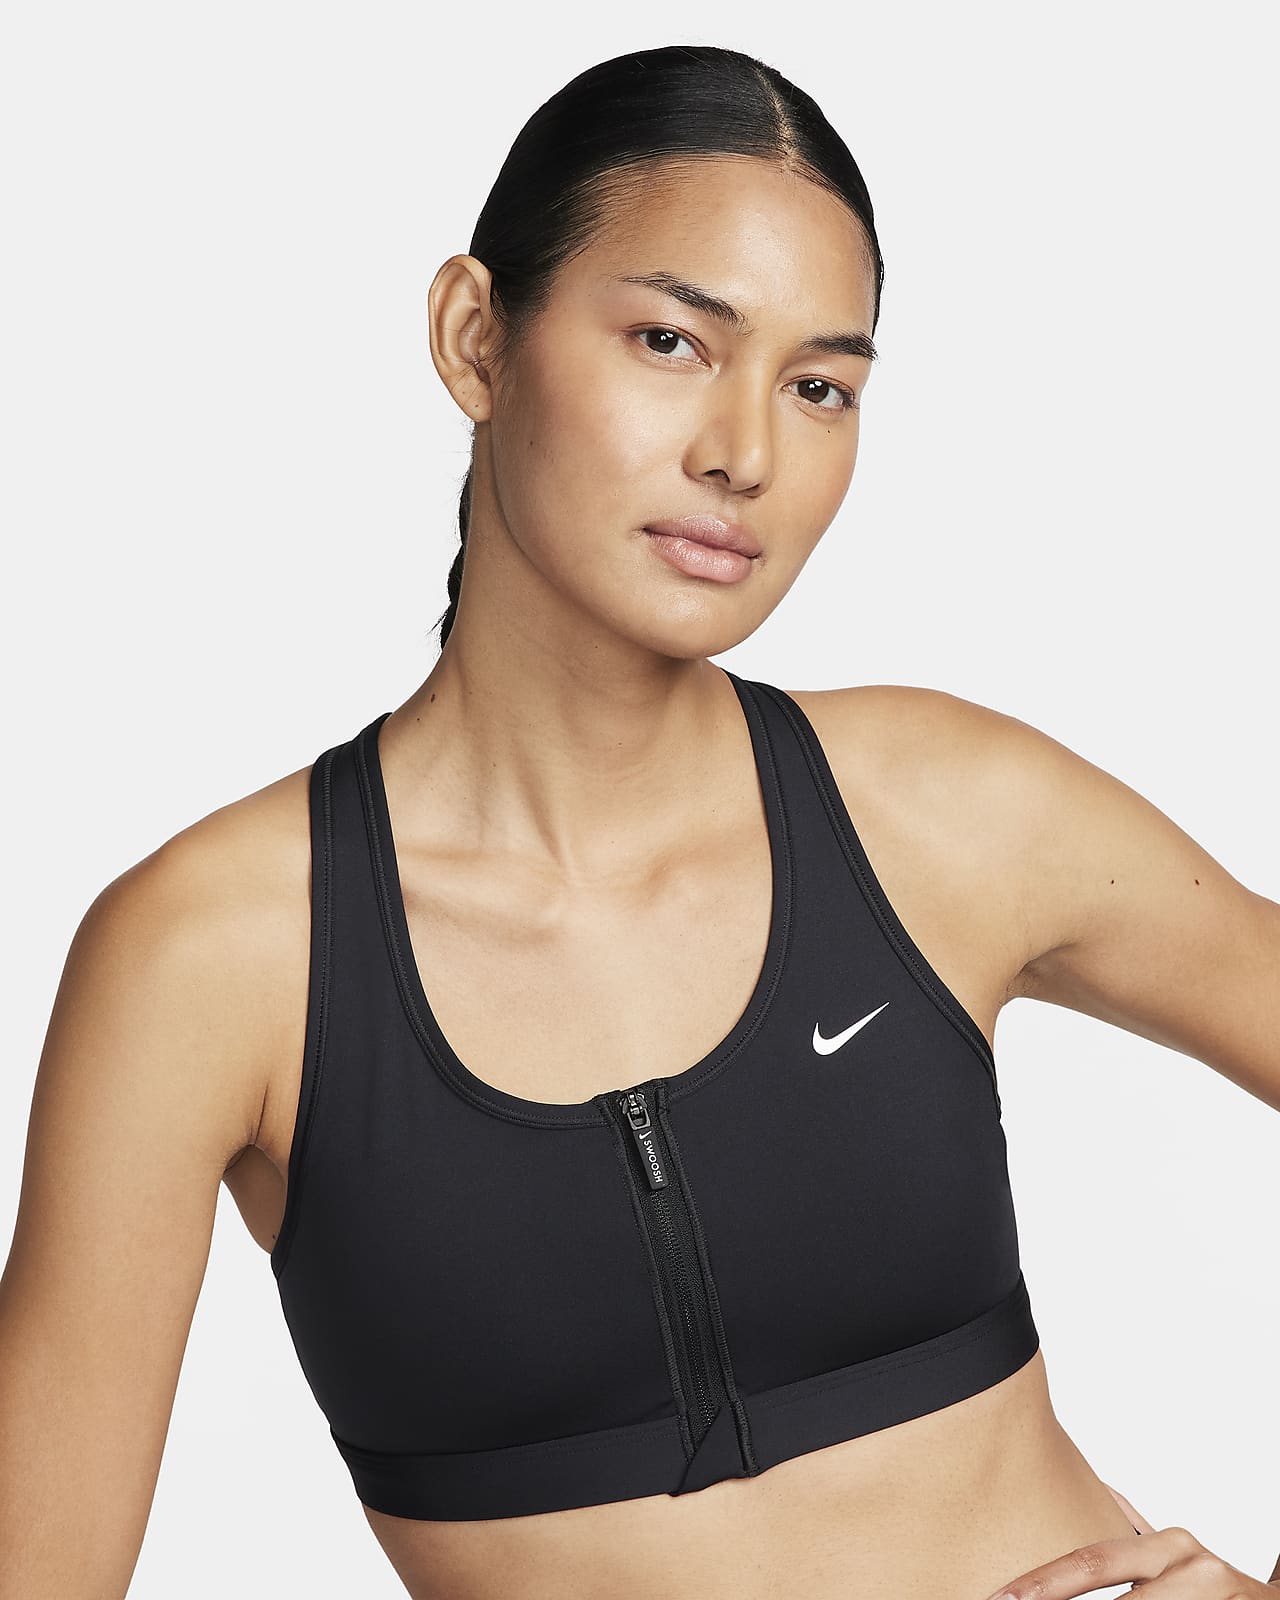 Women's Pullover Removable Cups Sports Bras. Nike IE